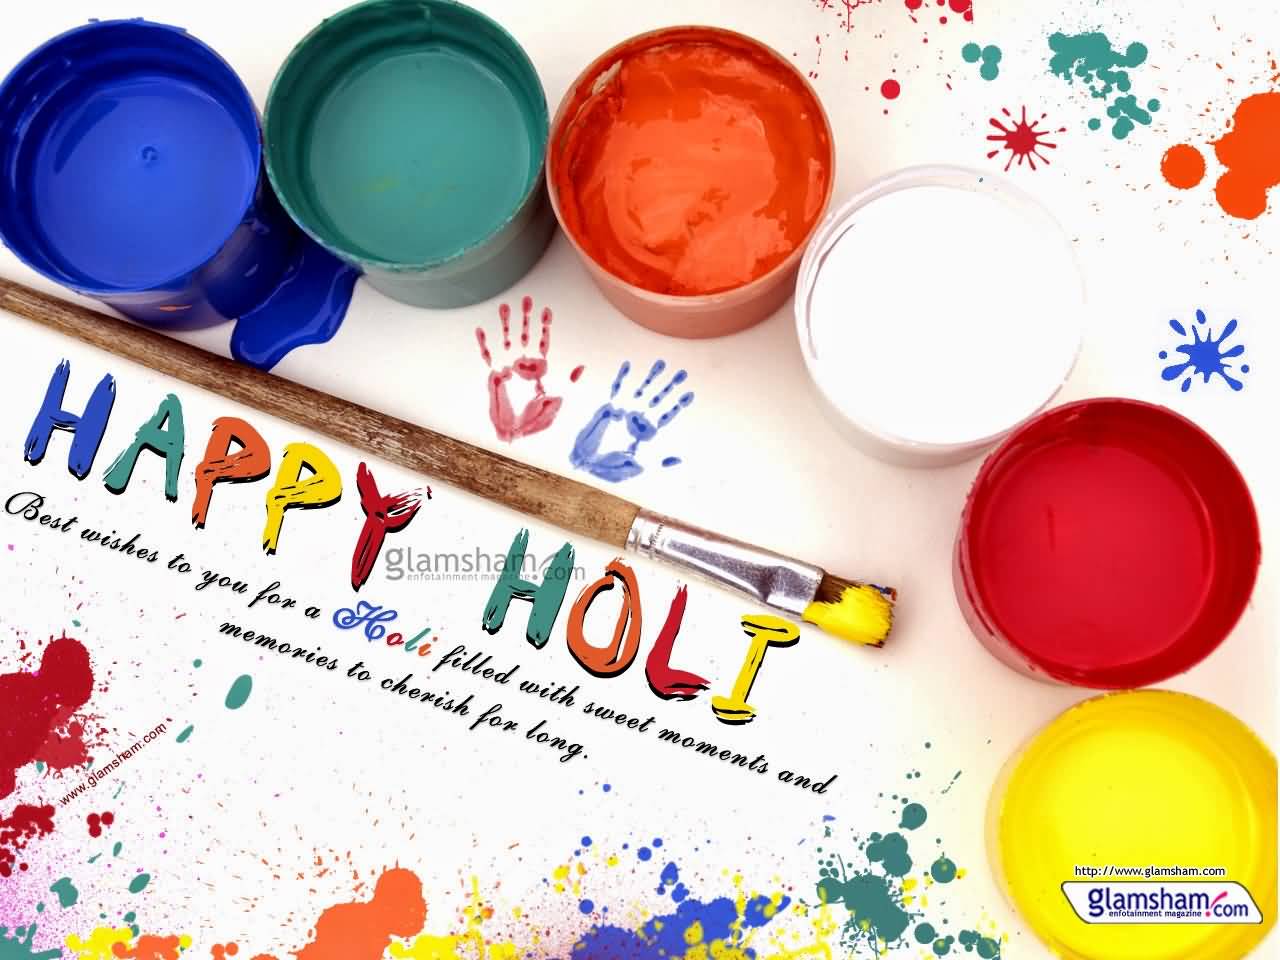 Happy Holi 2017 Best Wishes To You For A Holi Filled With Sweet Moments And Memories To Cherish For Long